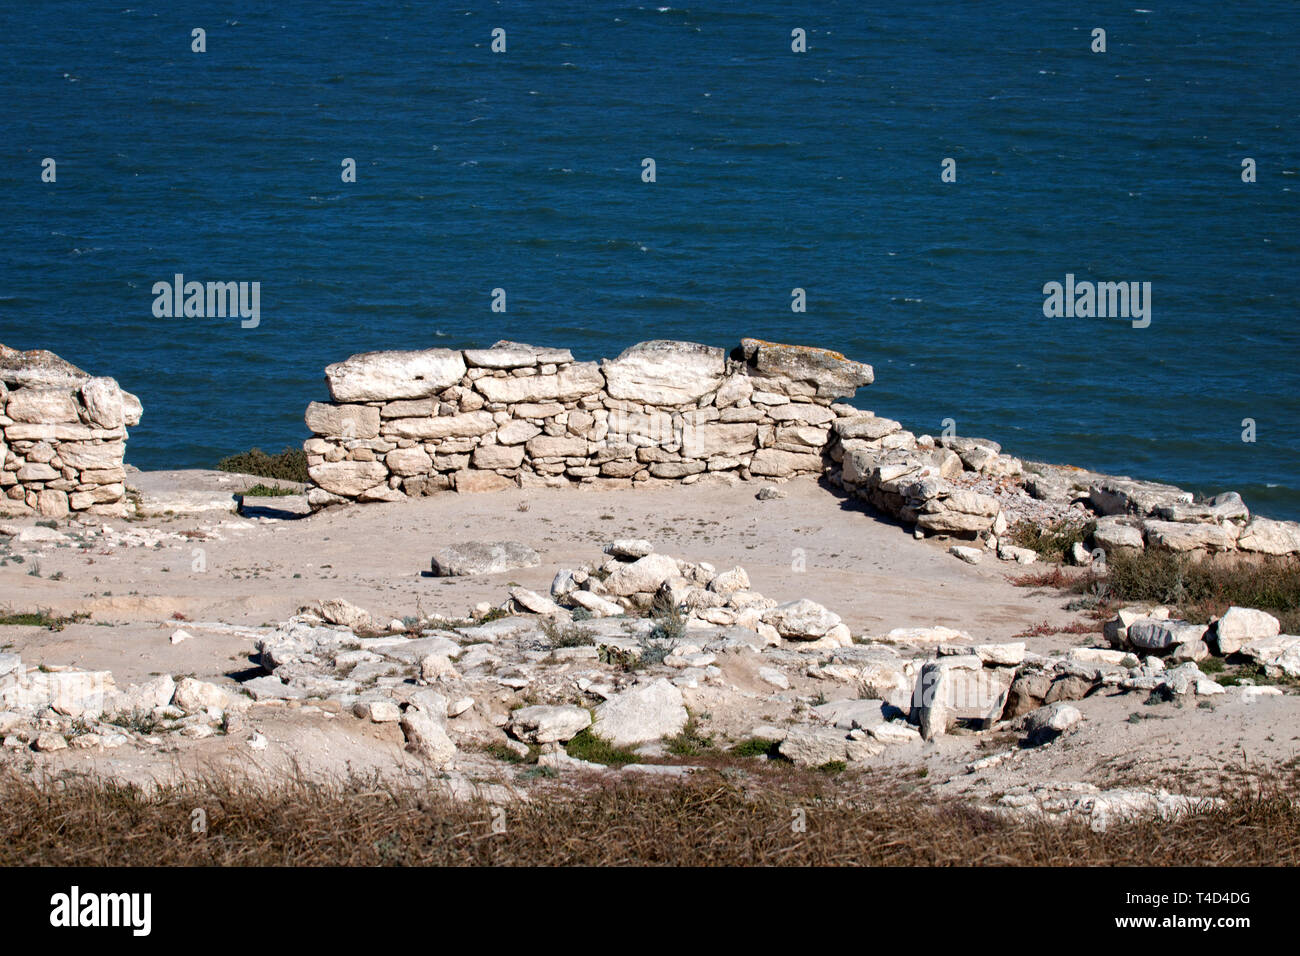 Ancient Greek Polis (Greek colonization) and Greek-Scythian settlements on the Black sea coast. Old archaeological excavations abandoned, shell rock f Stock Photo